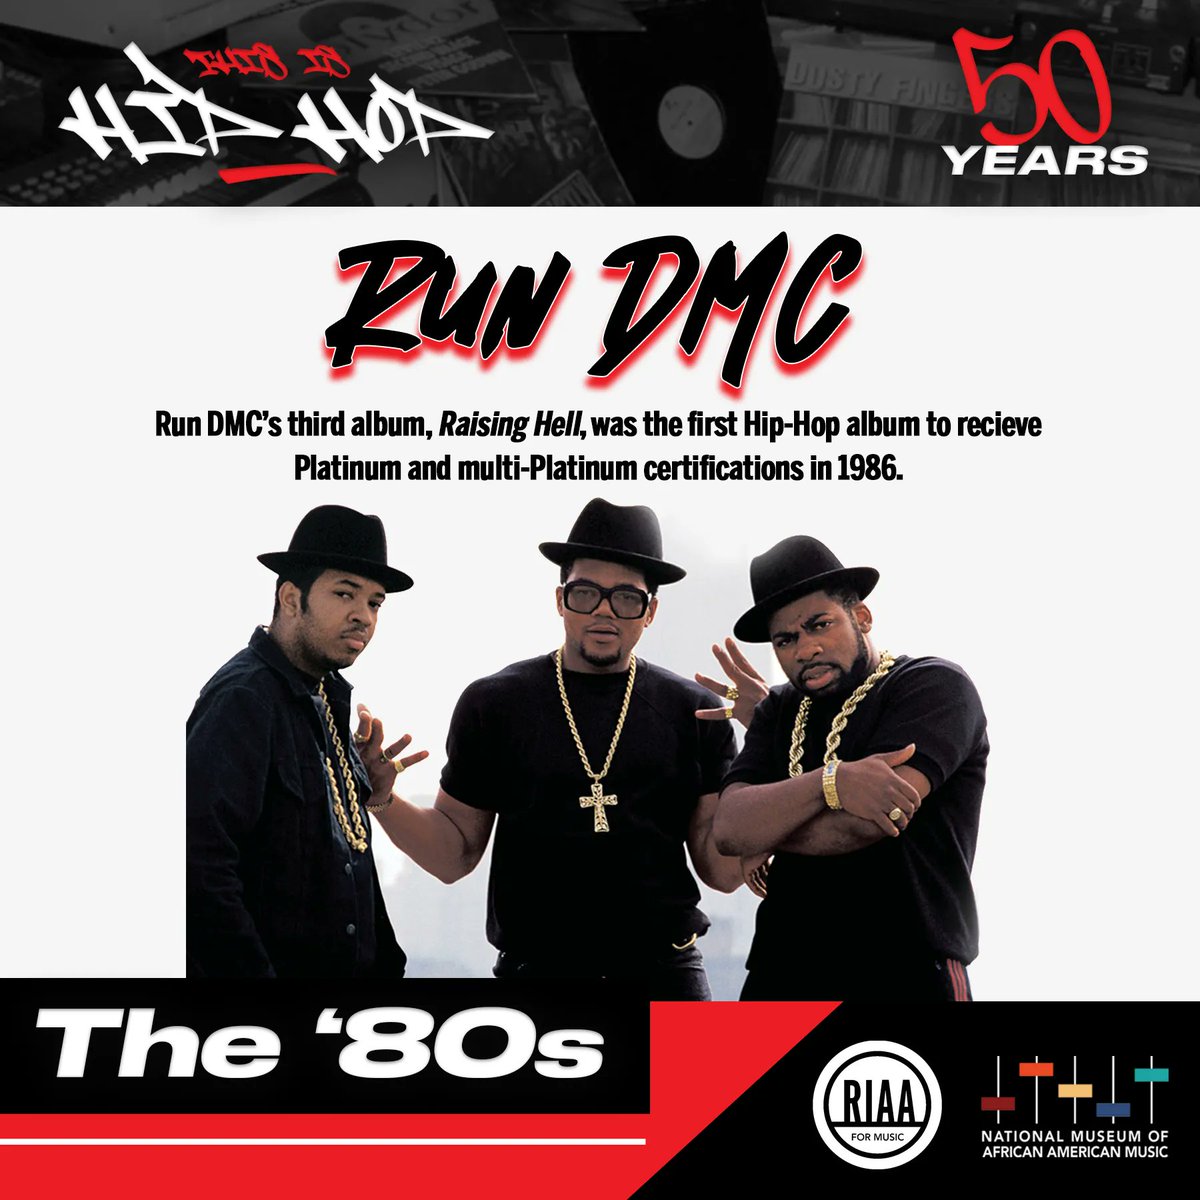 Released on May 15, 1986, @officialRundmc's third album, Raising Hell became the first Platinum and mult-Platinum hip hop record. #NMAAM #ThisIsHipHop #RunDMC #RIAA ##HipHop50